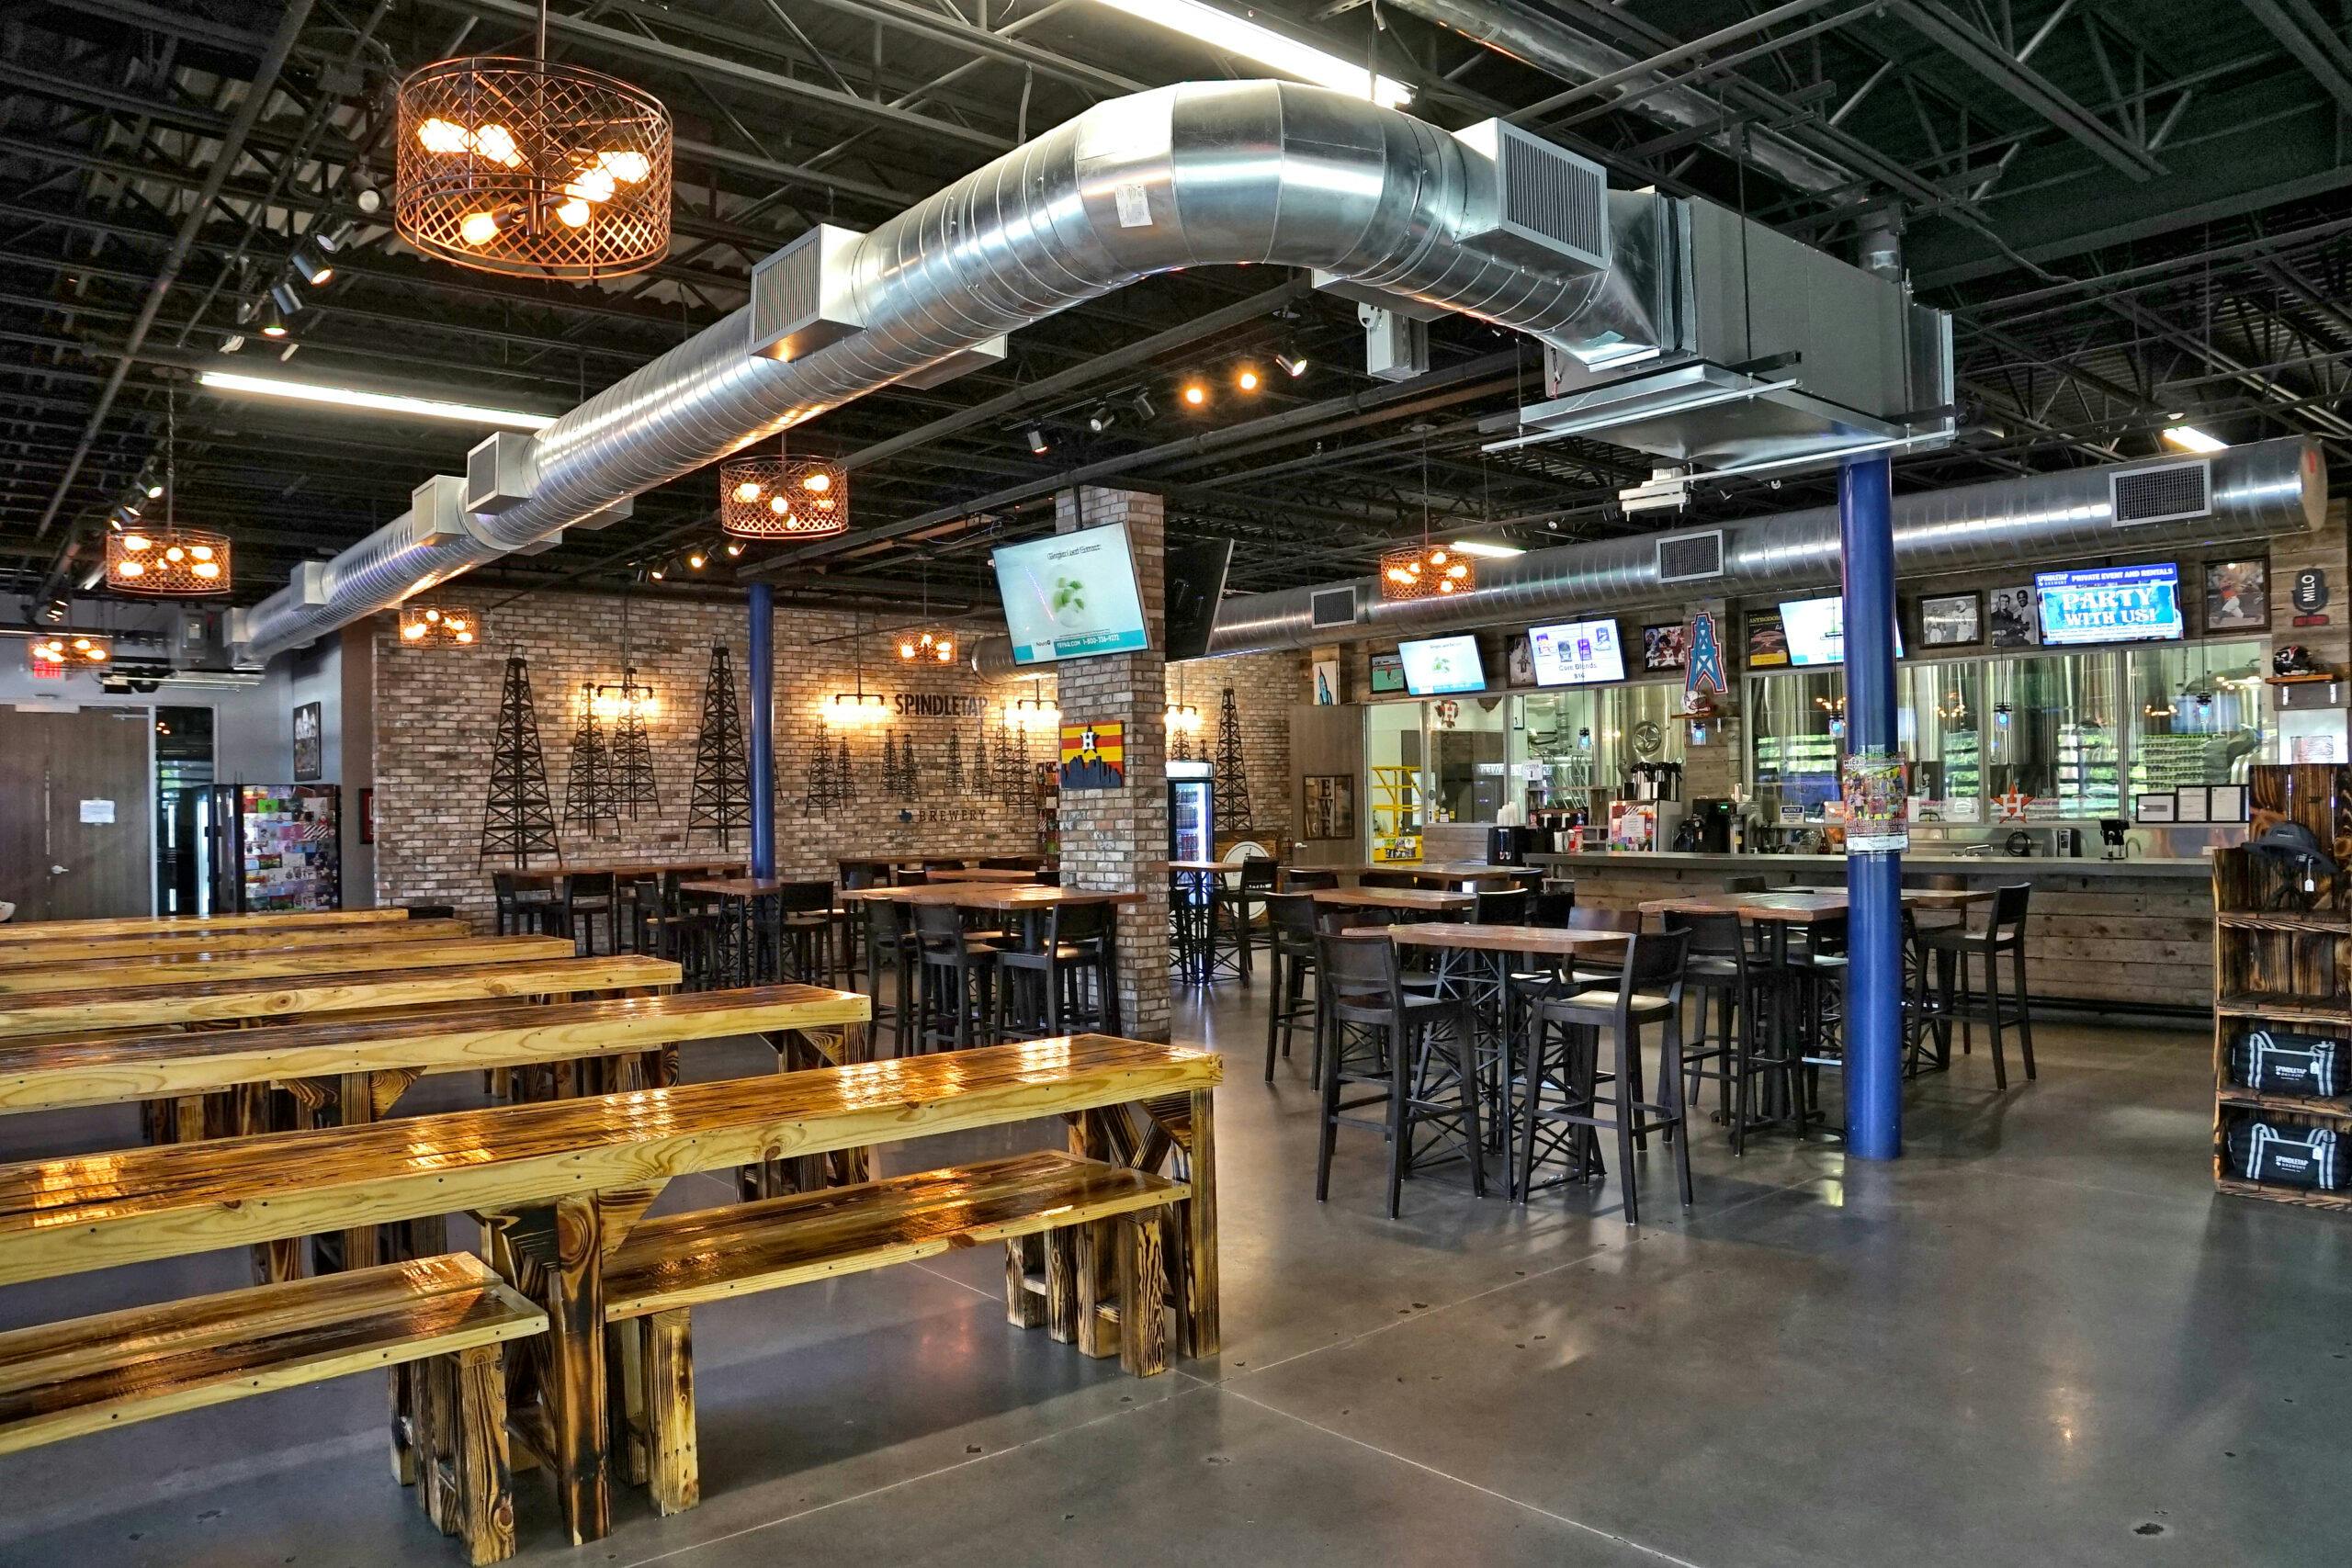 Inside SpindleTap Brewery. Where people sit on benches and tables and enjoy a cold beer.